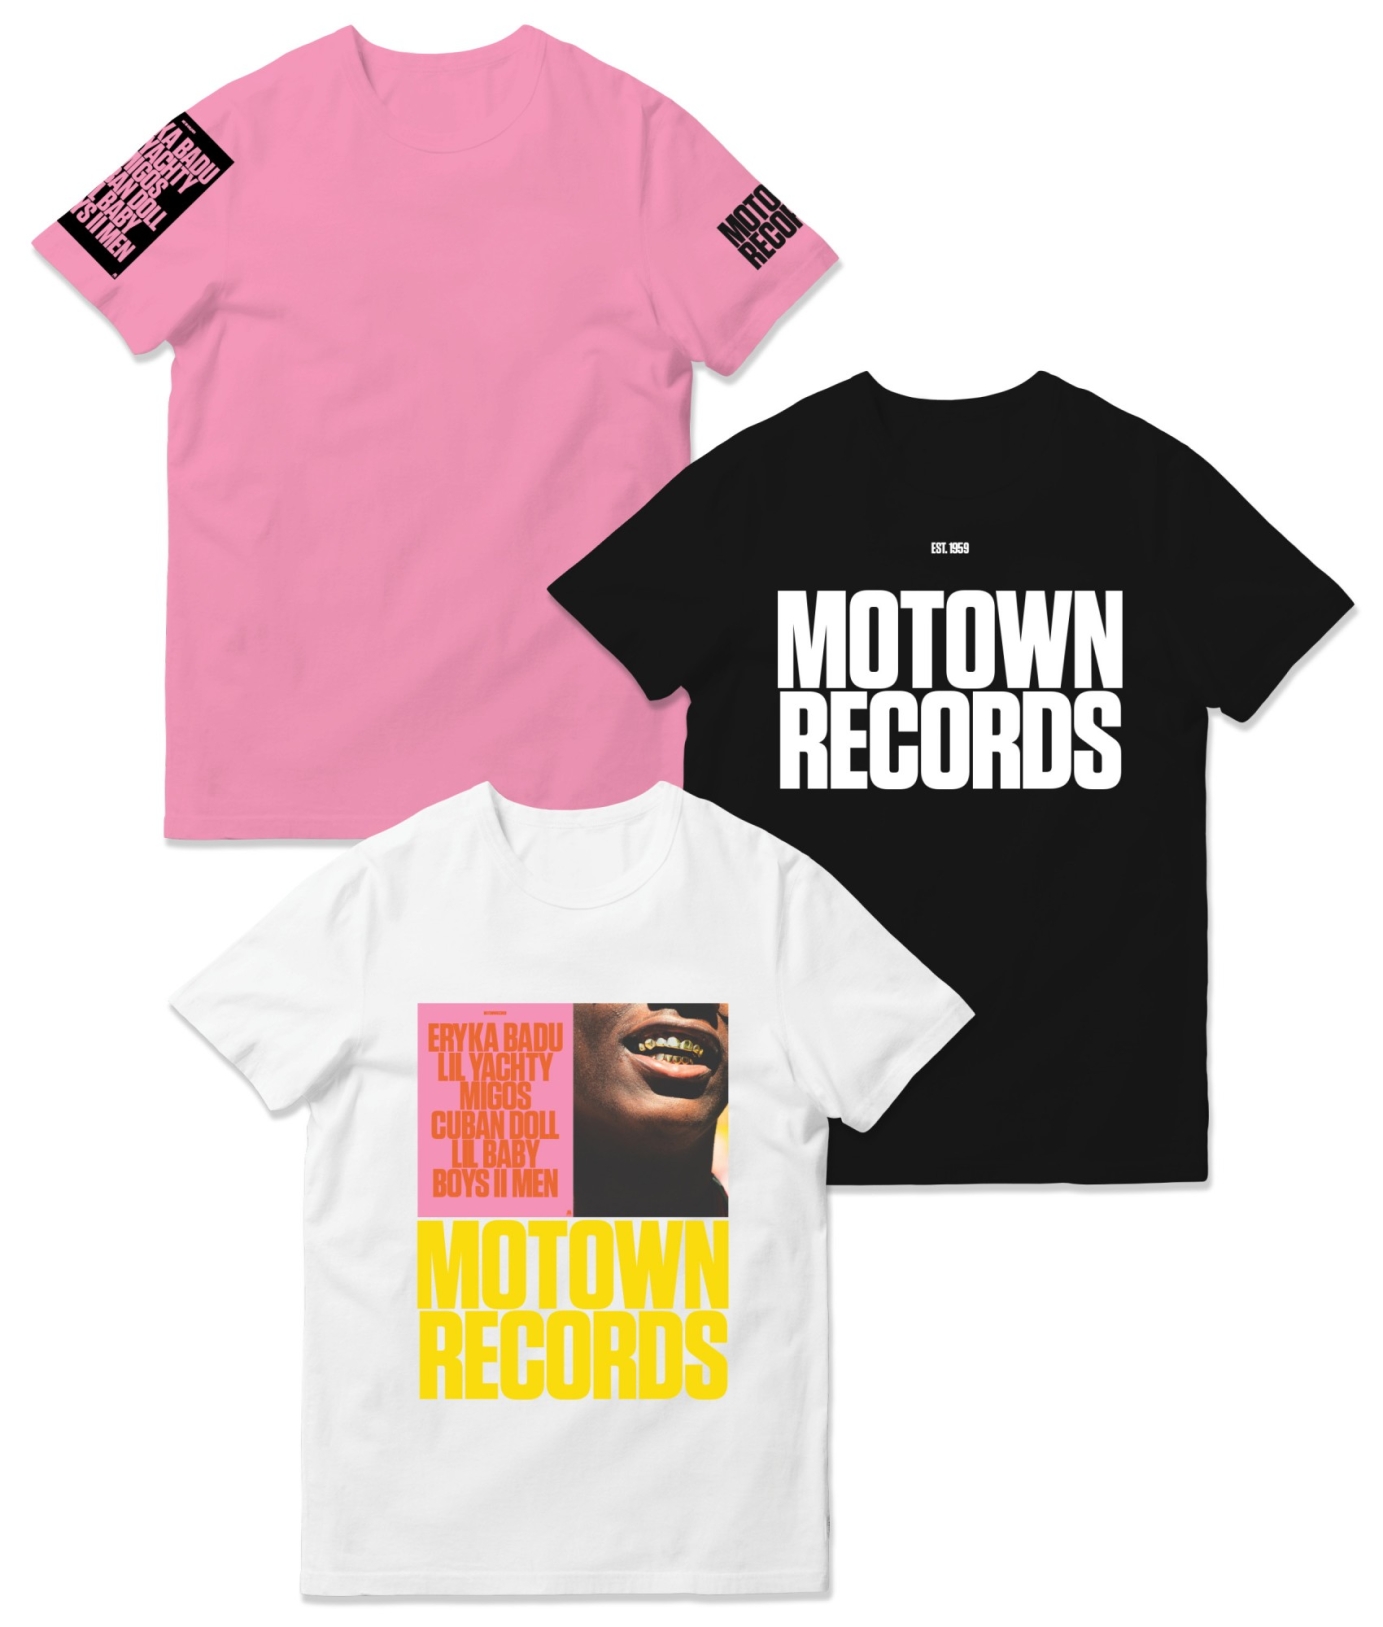 60 YEARS OF MOTOWN RECORDS — 002